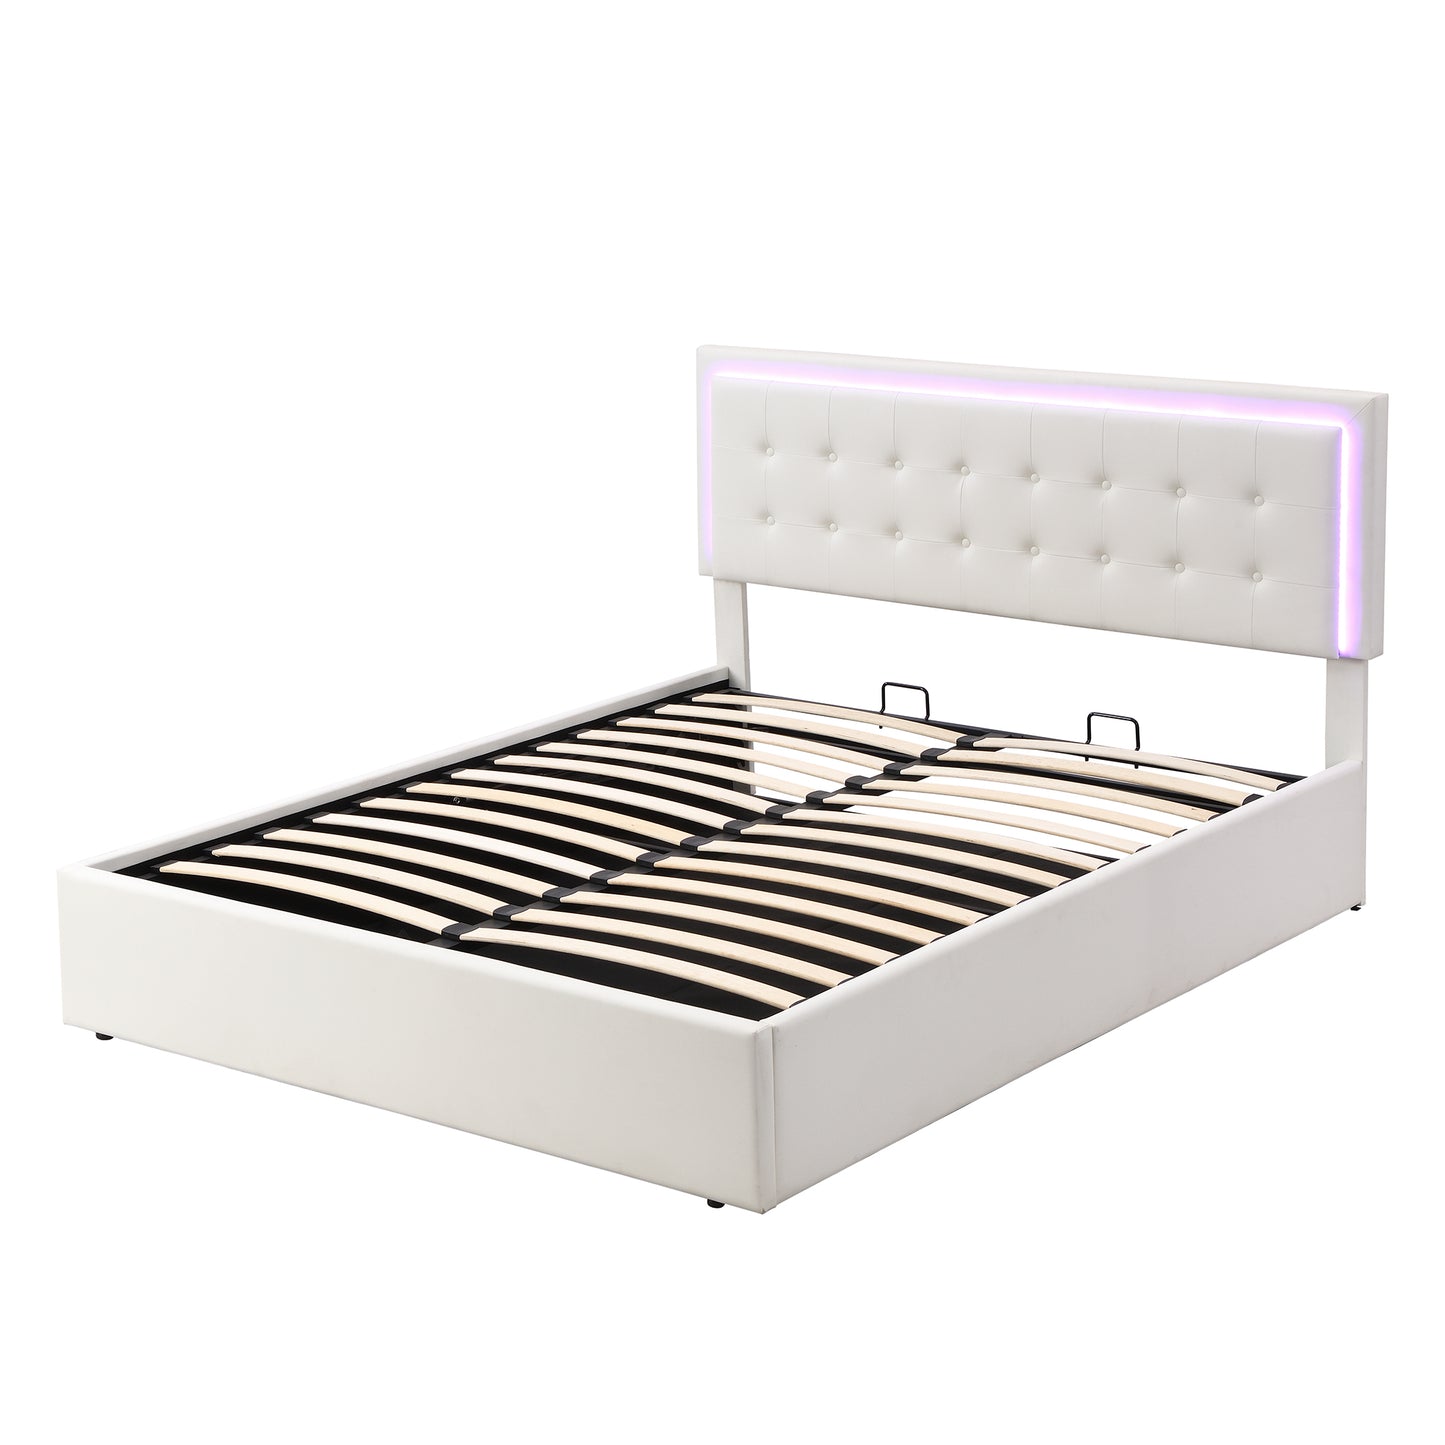 Queen Size Tufted Upholstered Platform Bed with Hydraulic Storage System,PU Storage Bed with LED Lights,White